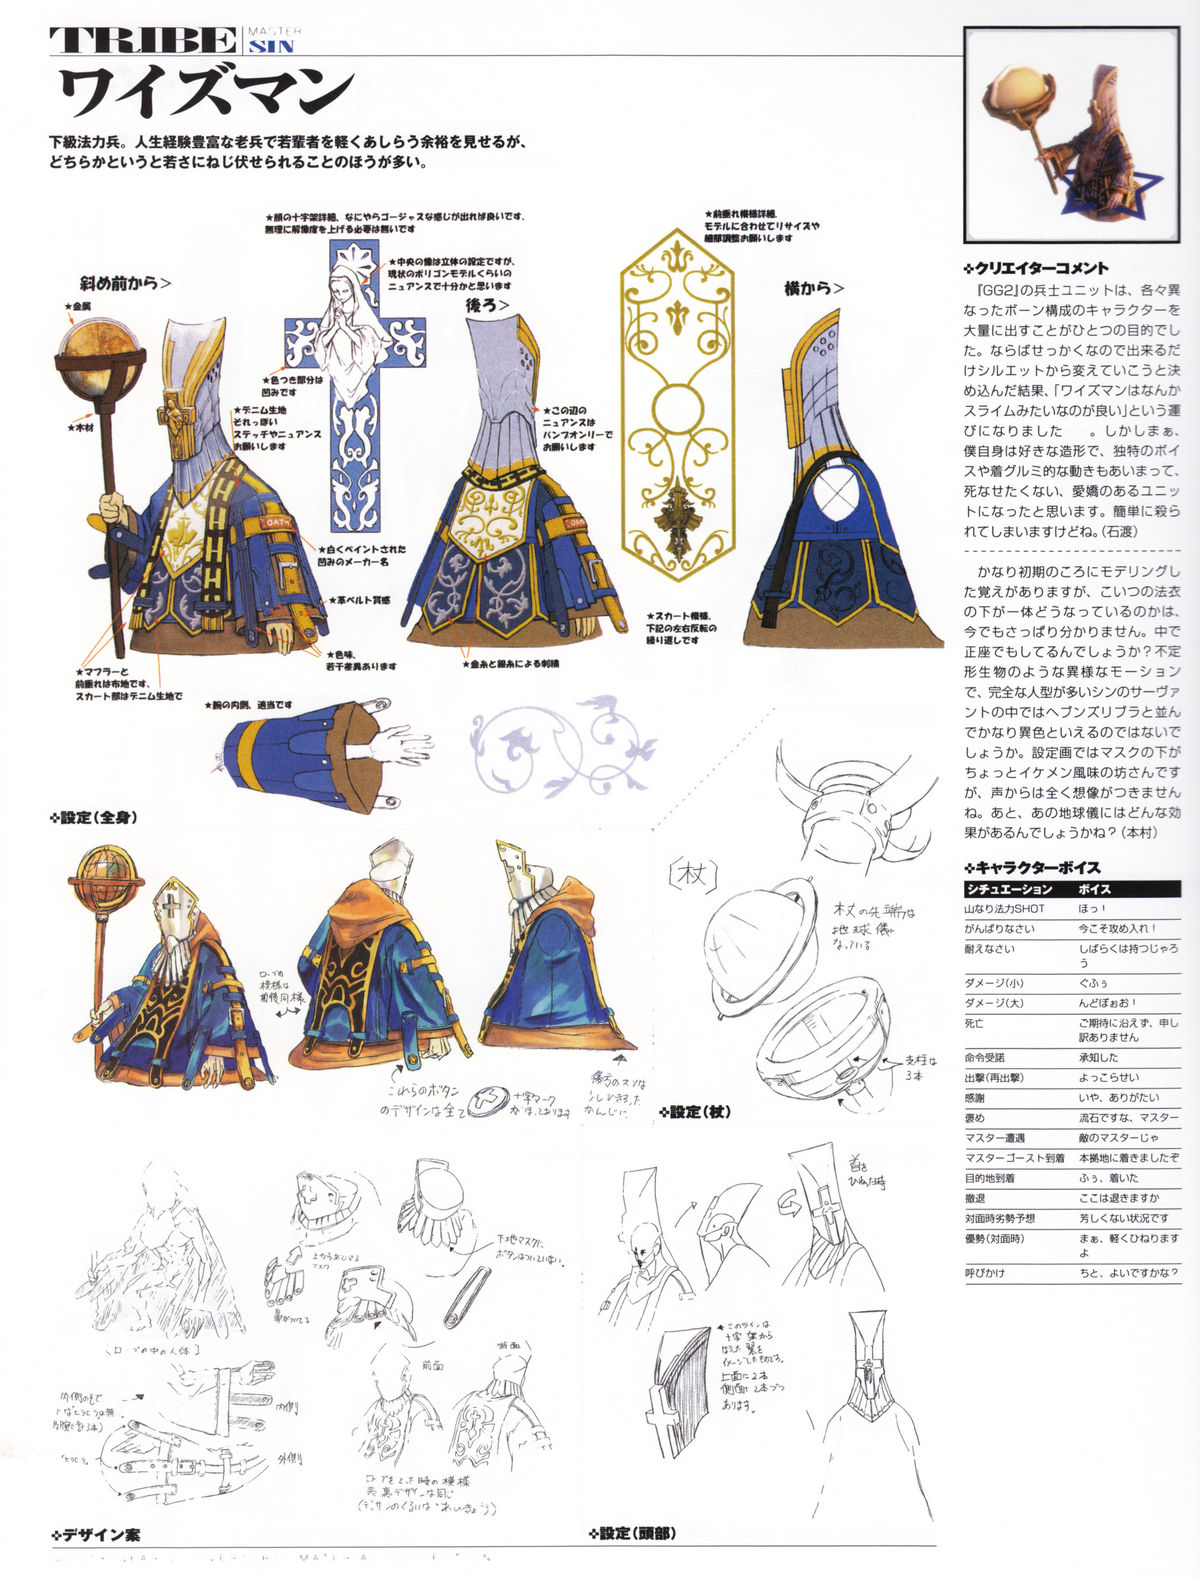 Guilty Gear 2. Overture Material Collection (99 works) » Pictures